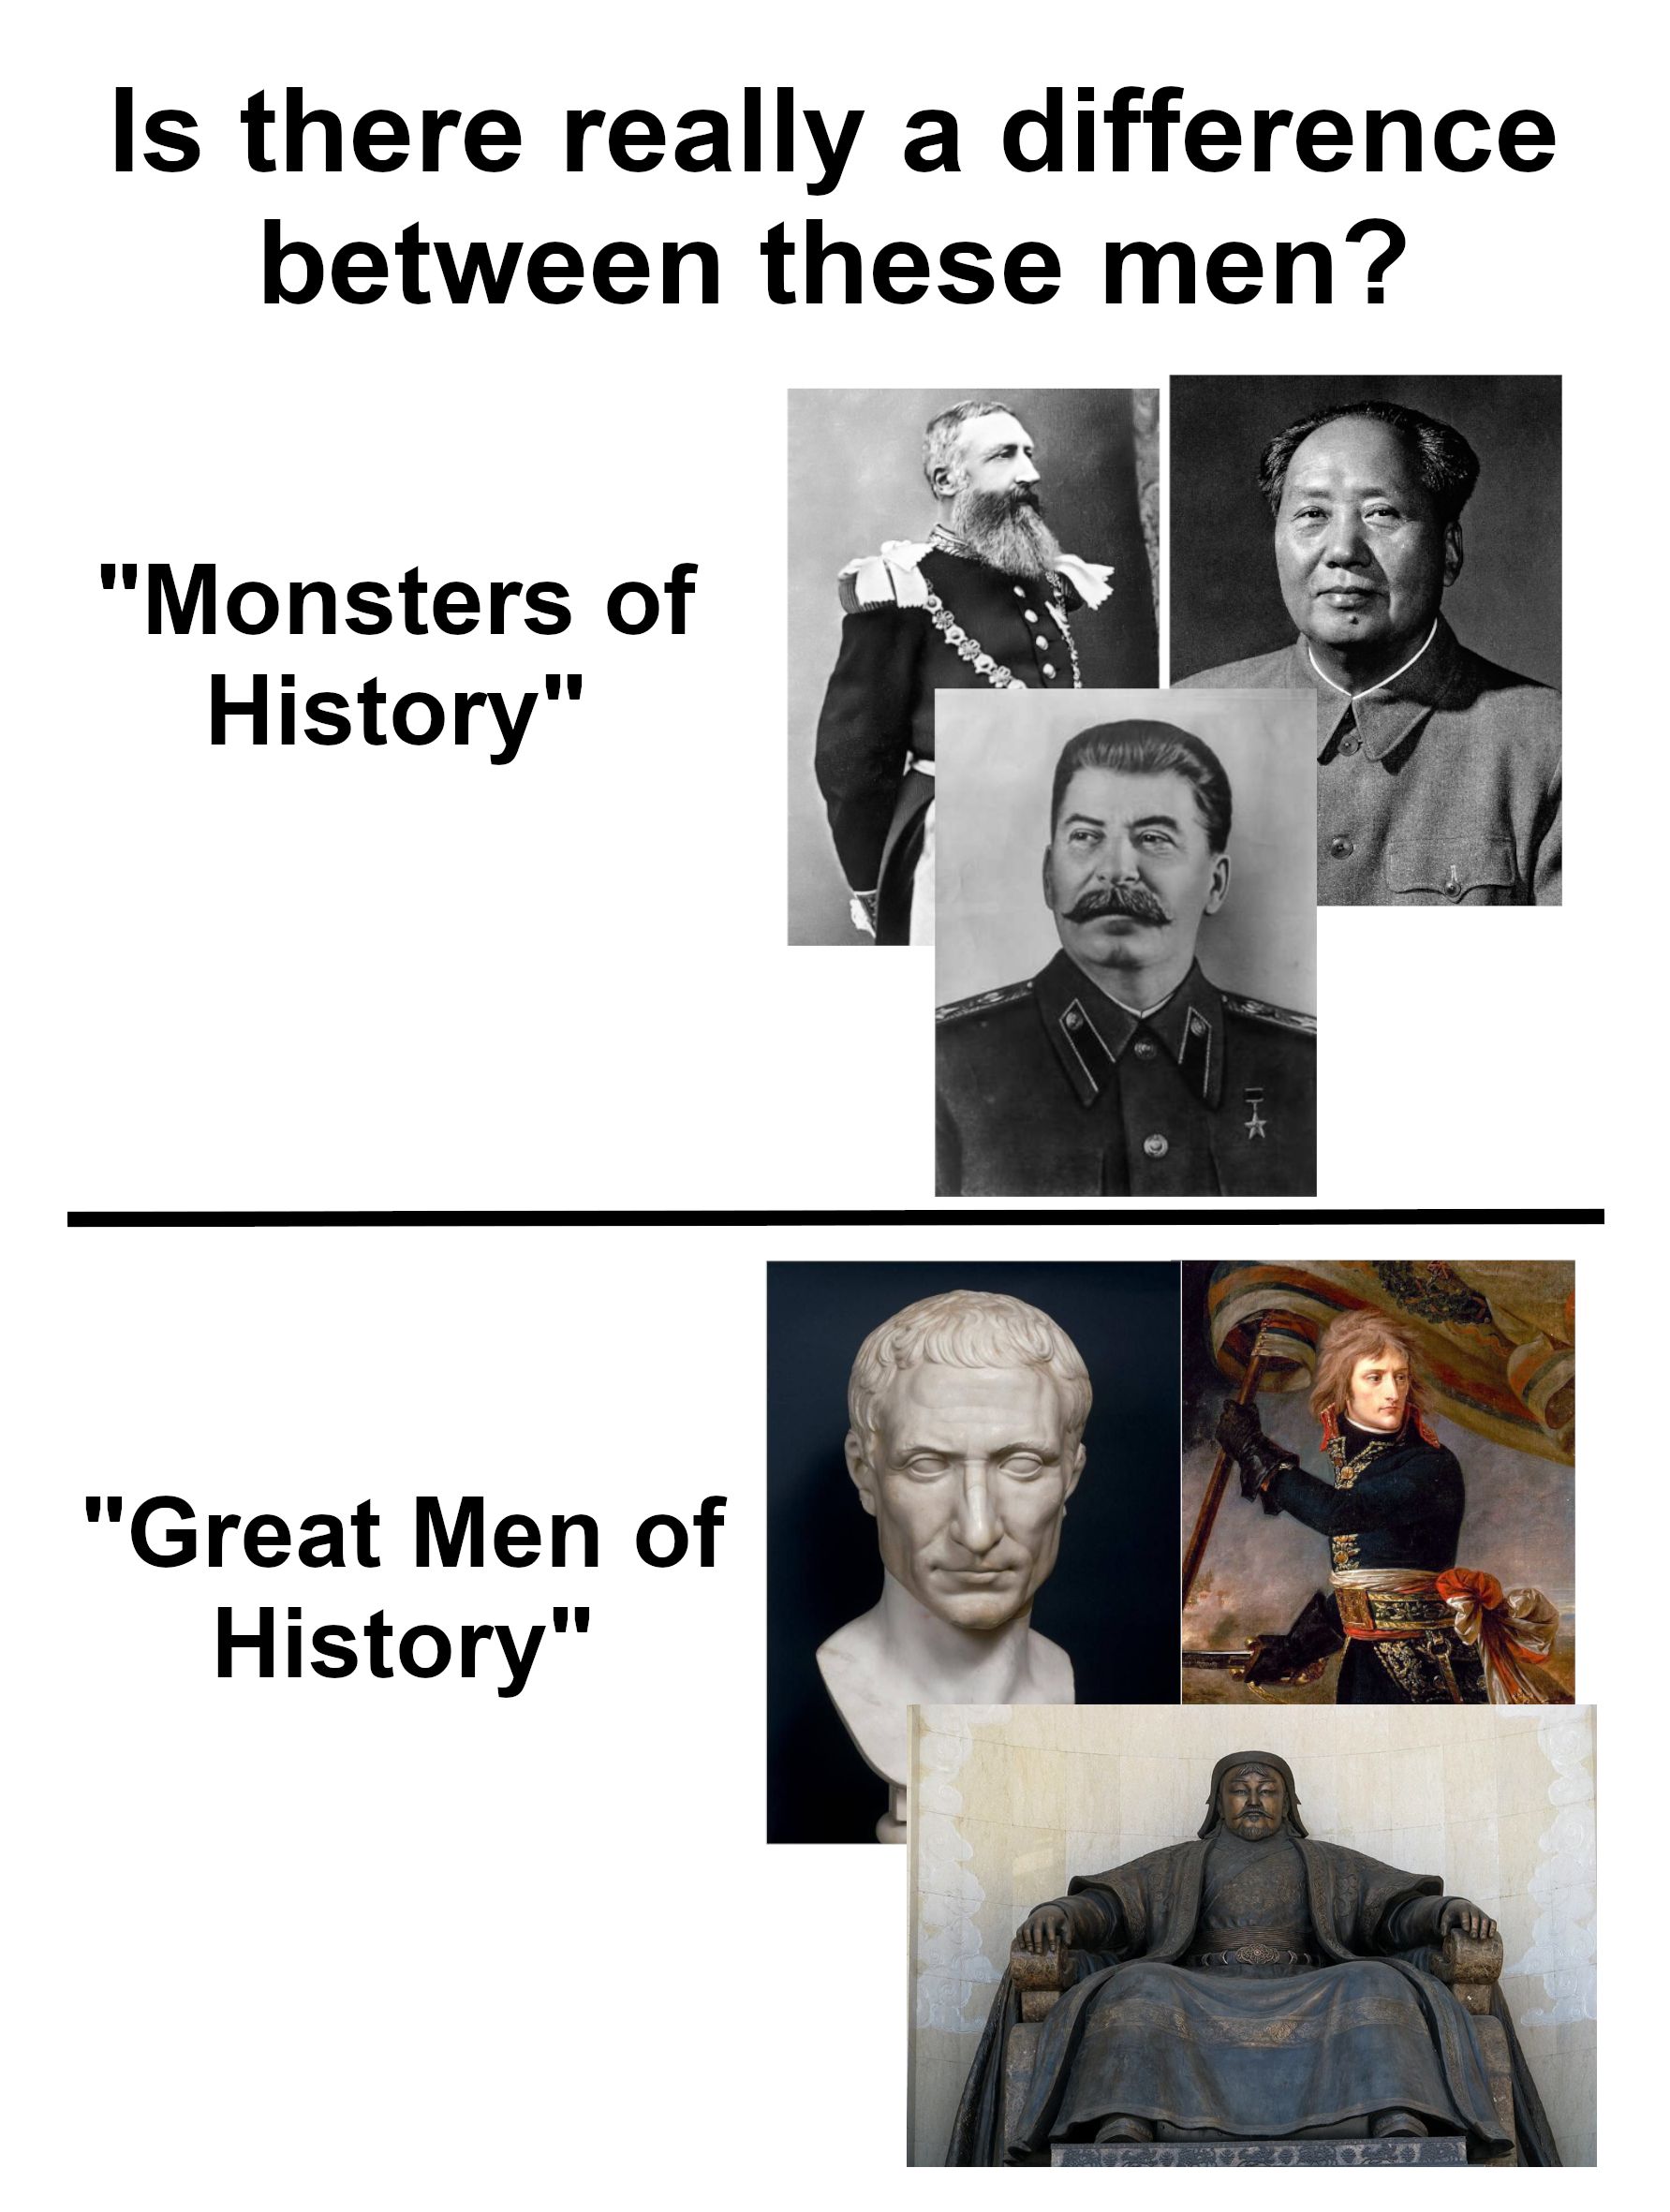 History is not fair